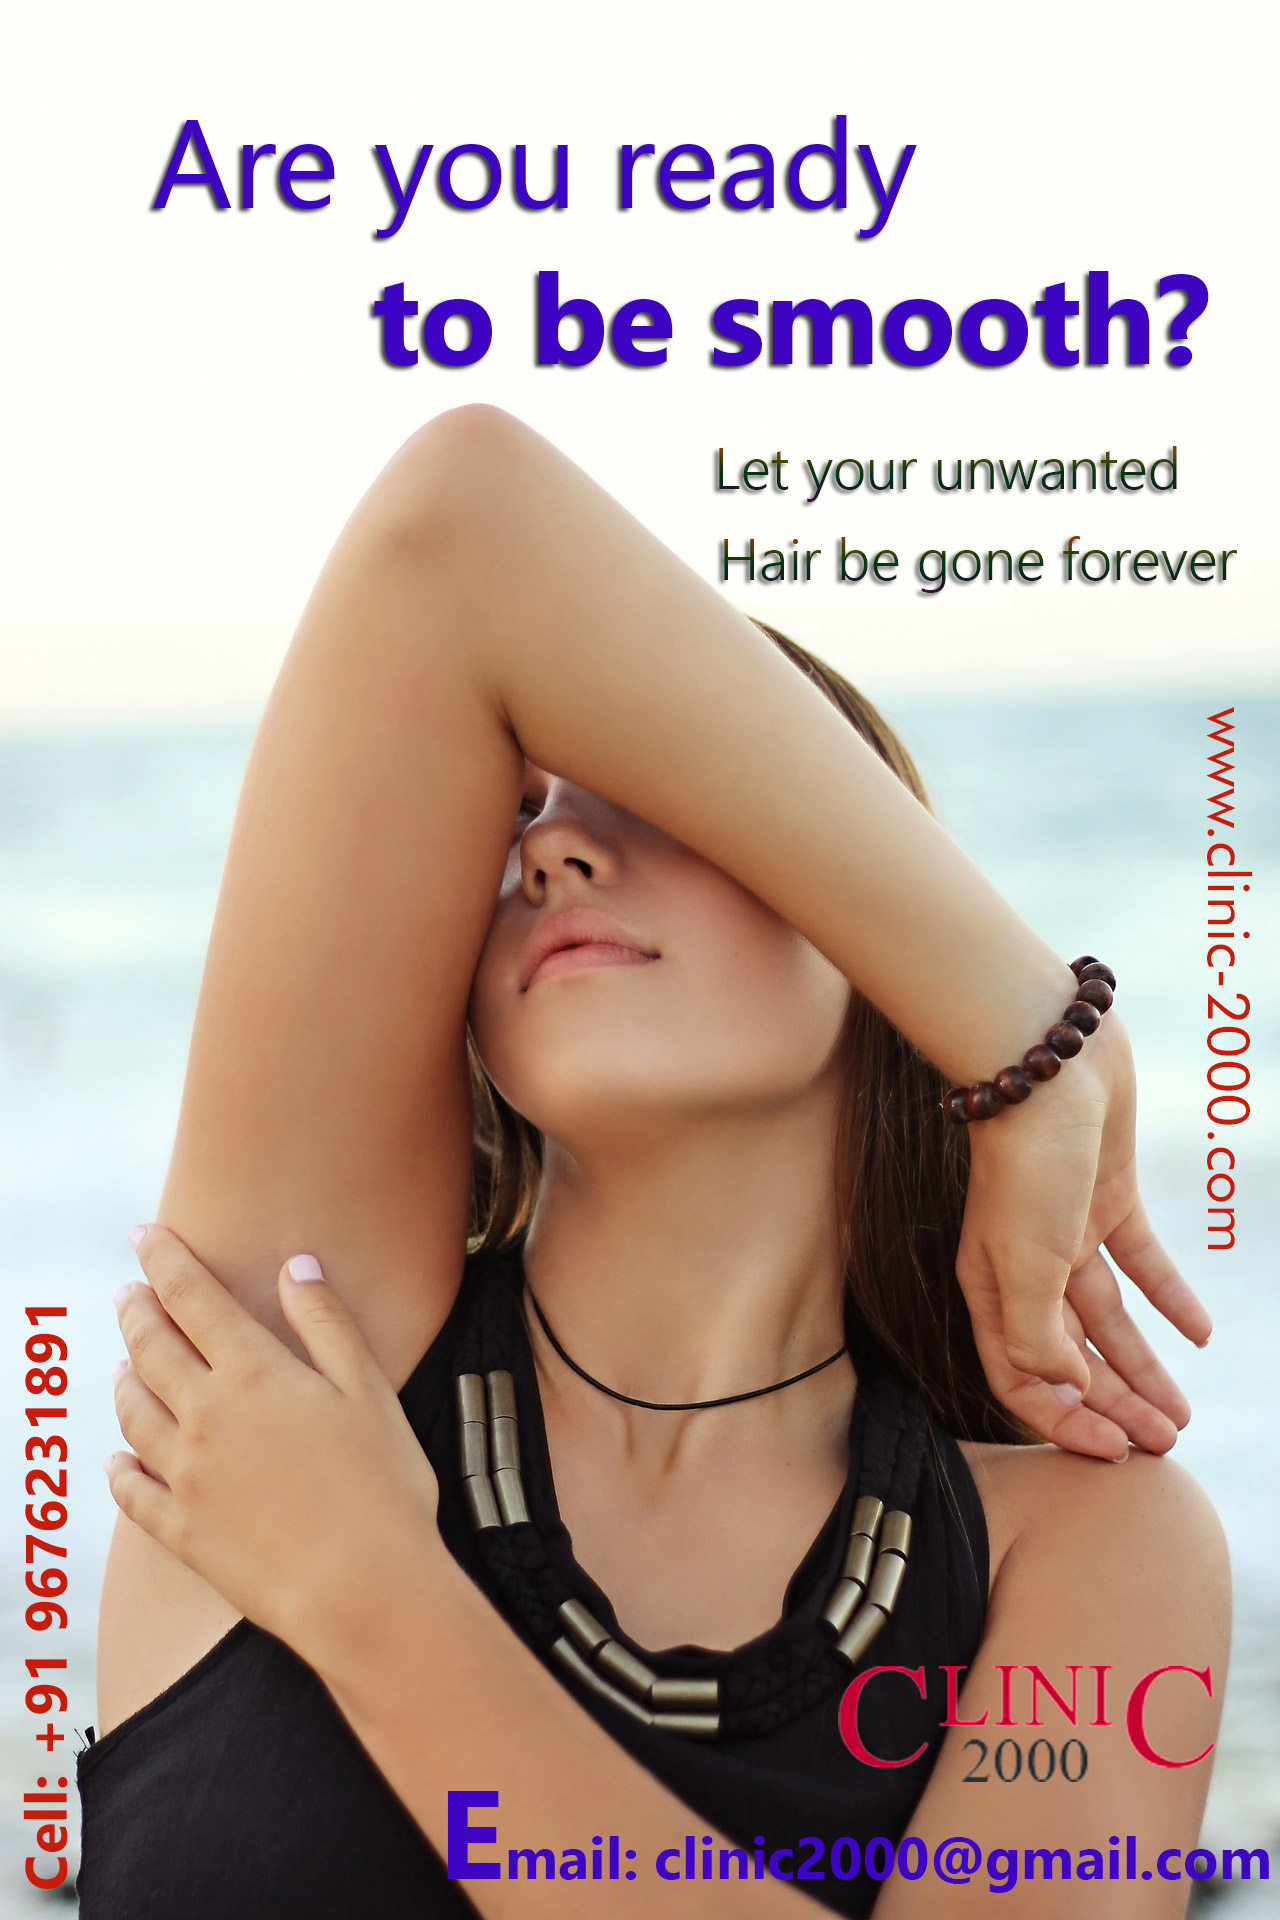 Laser Hair Removal treatment in Hyderabad